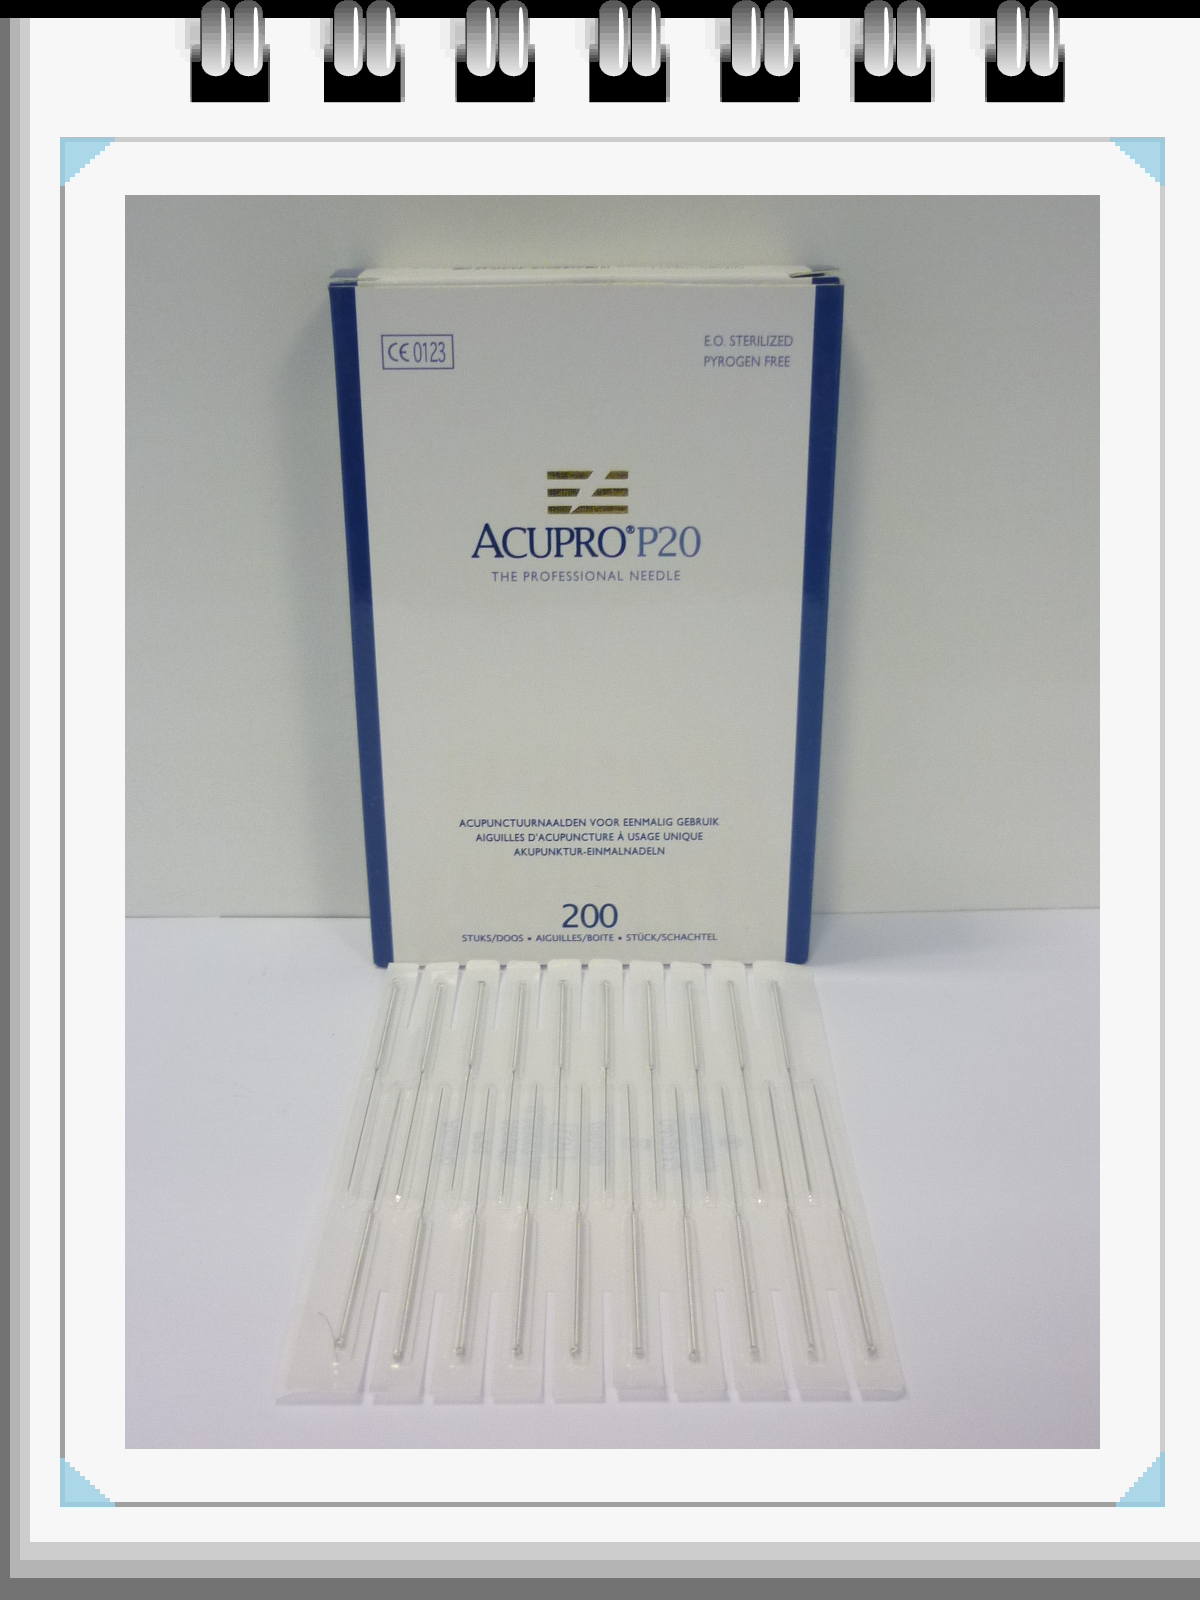 All Products - Acupuncture naalden 0,25 x 40mm - p--200